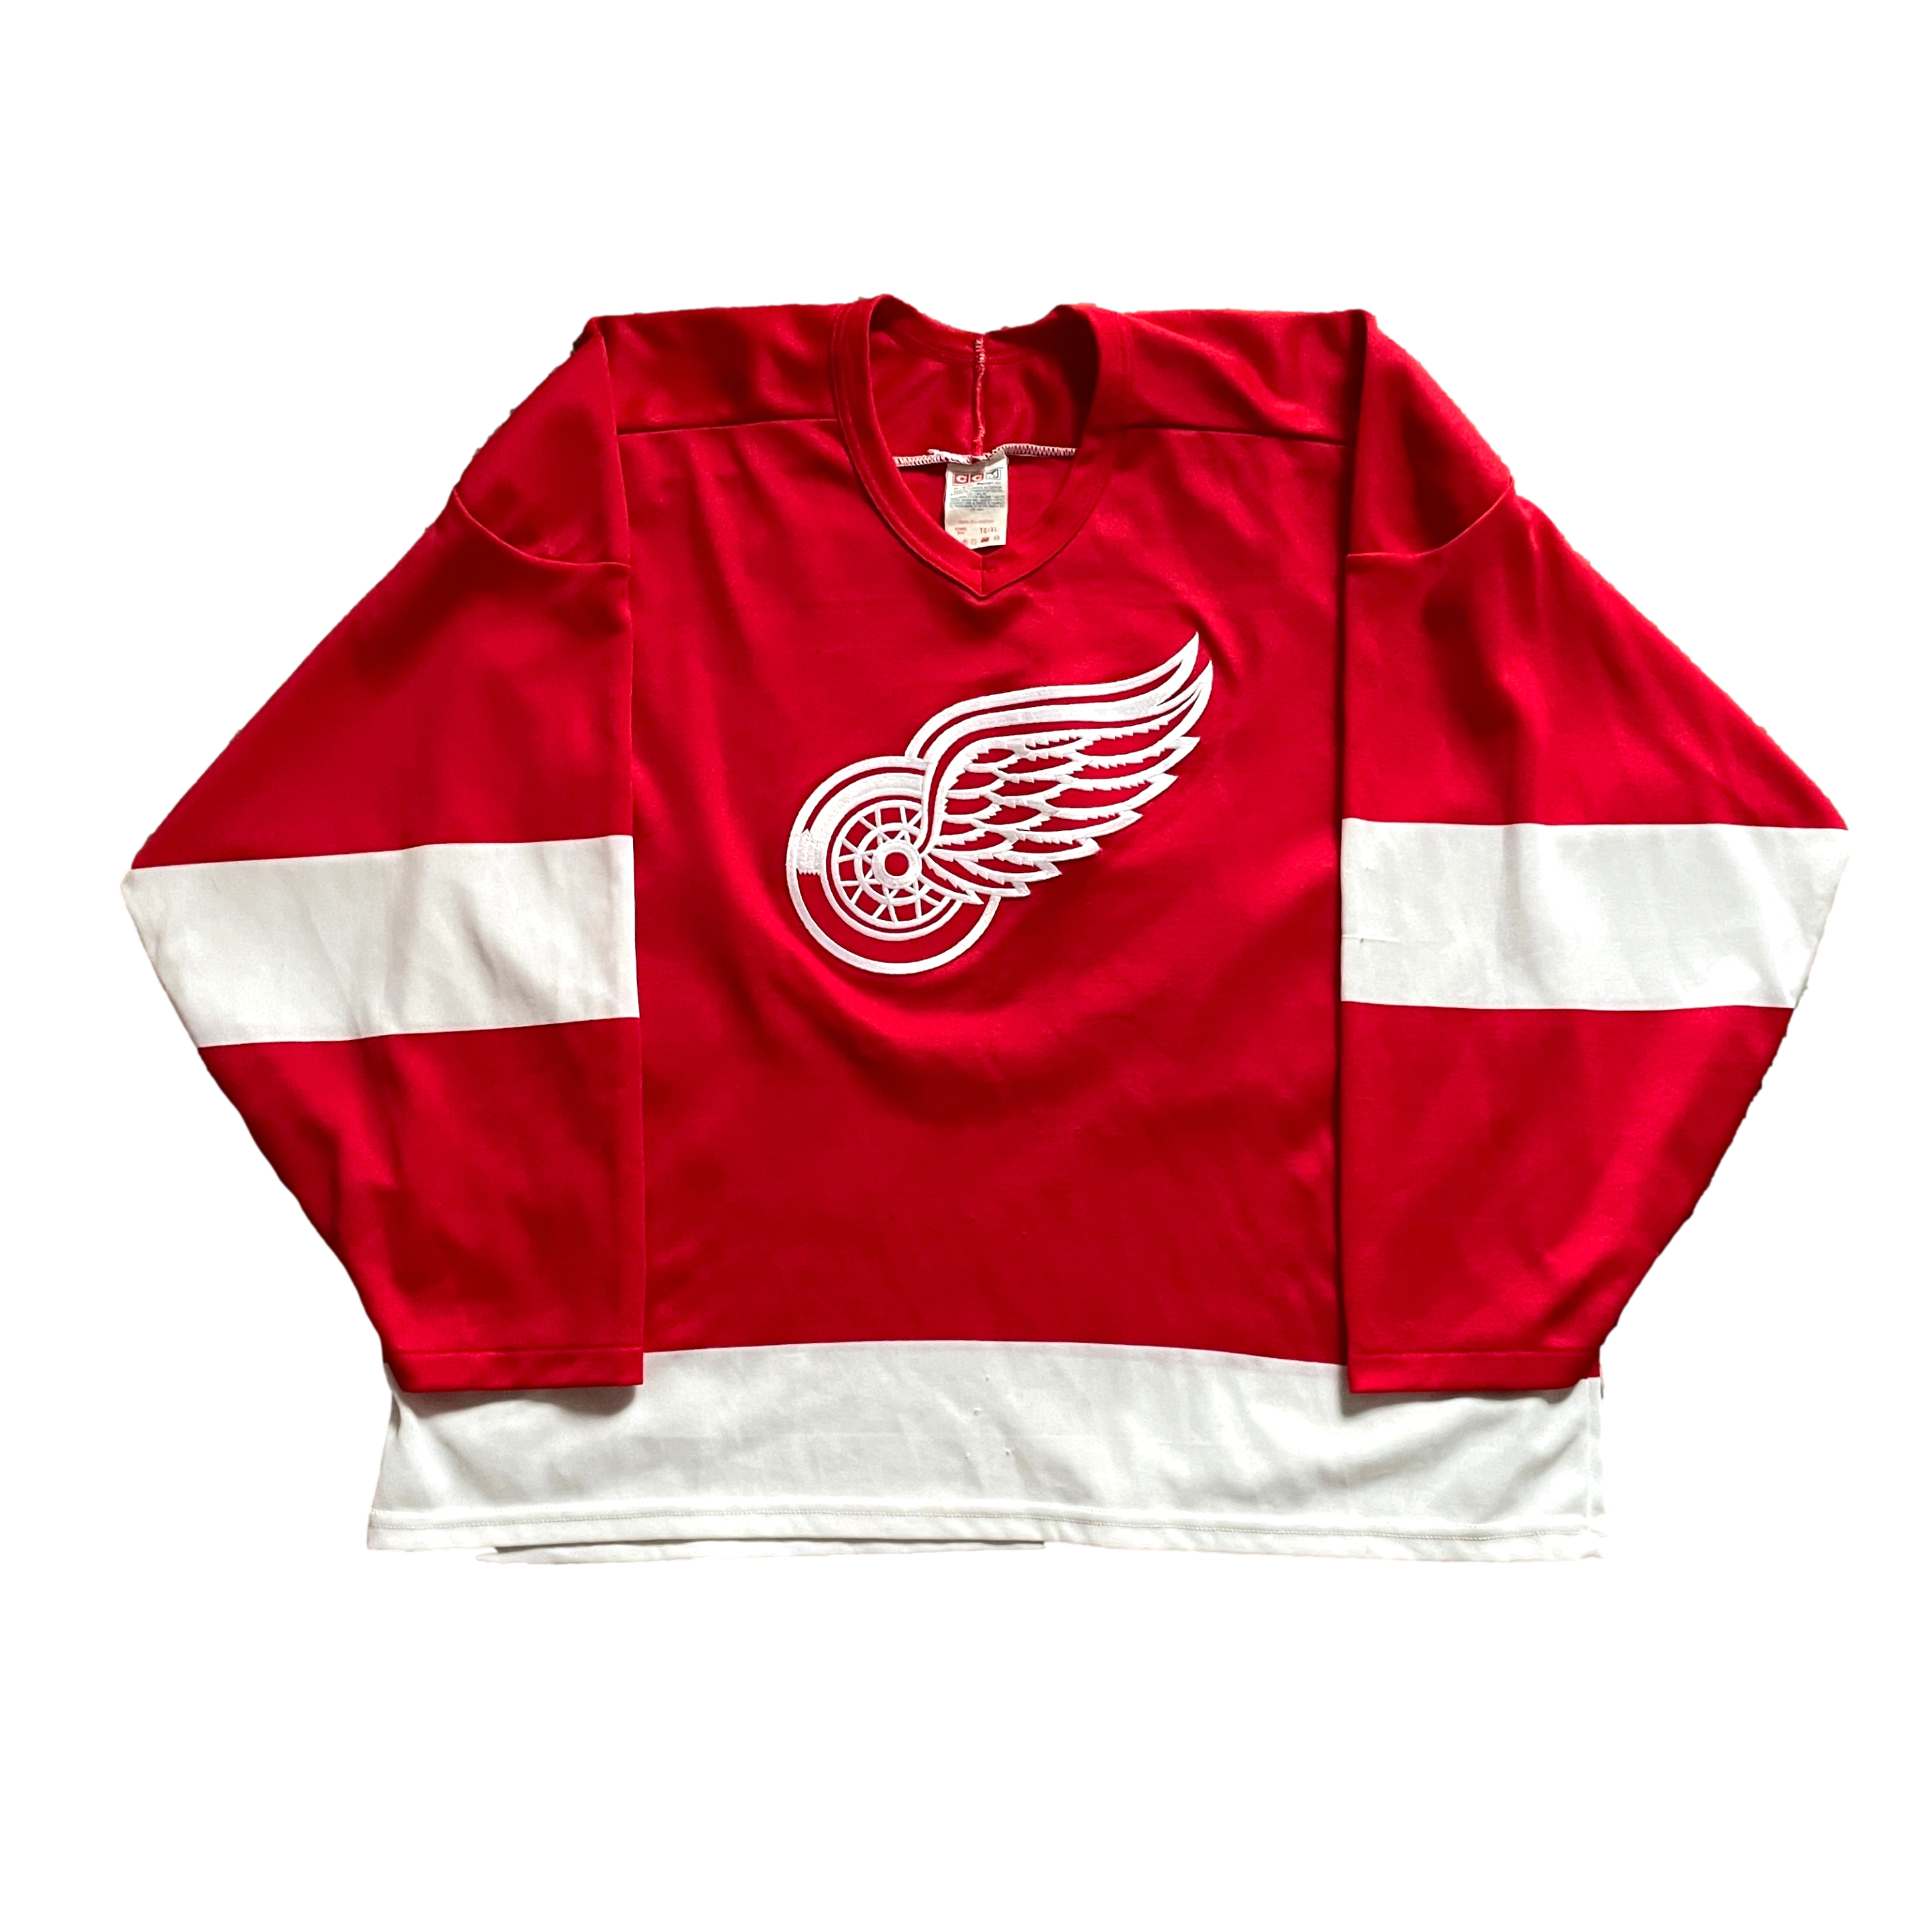 Vintage Detroit Red Wings NHL Hockey Jersey (XL)